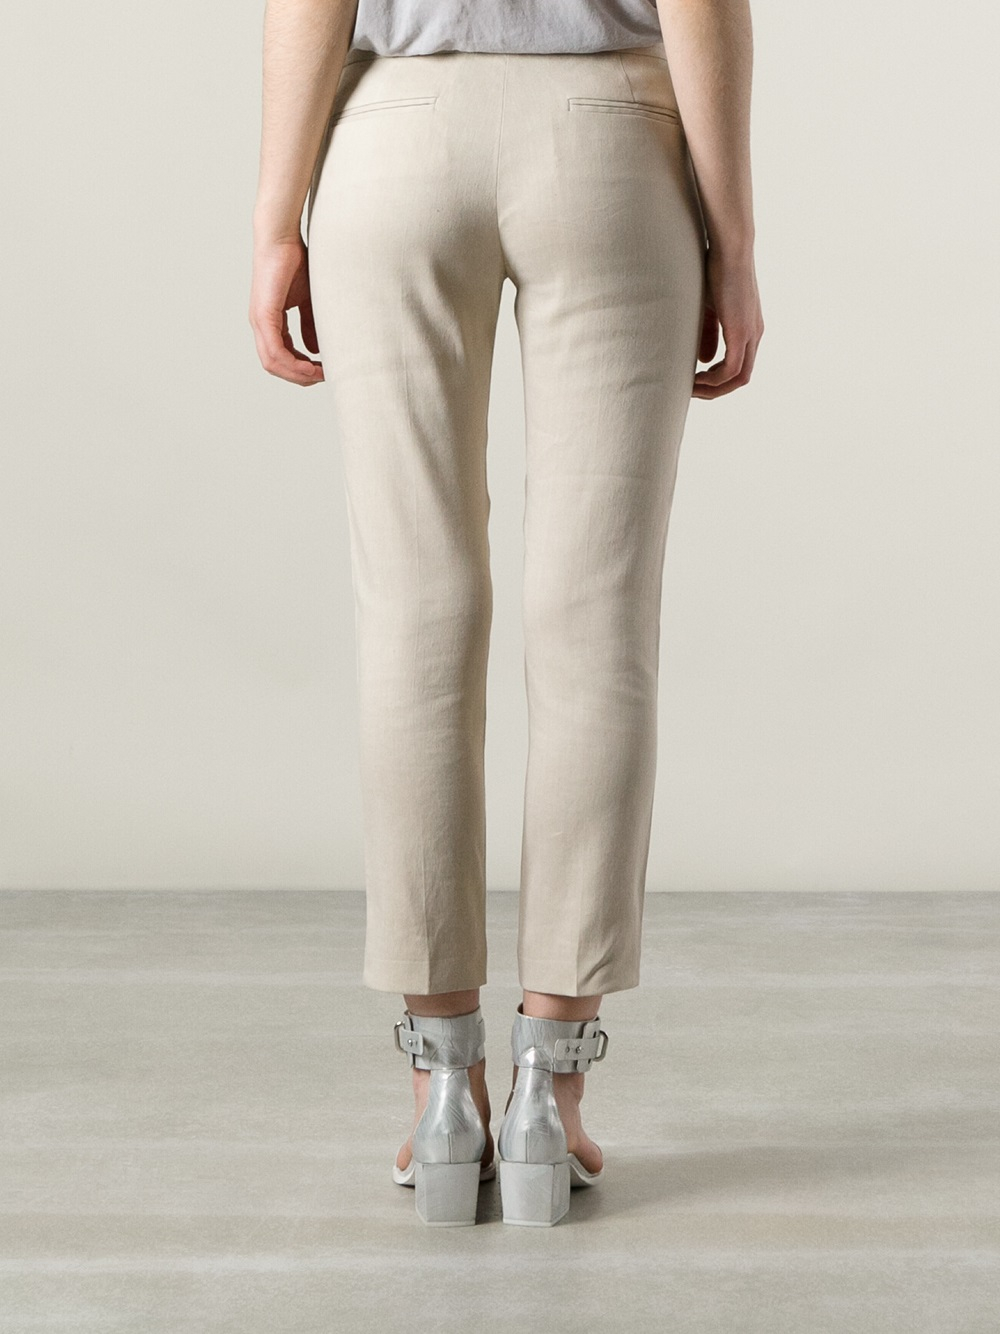 JOSEPH Queen Cropped Trousers in Natural - Lyst